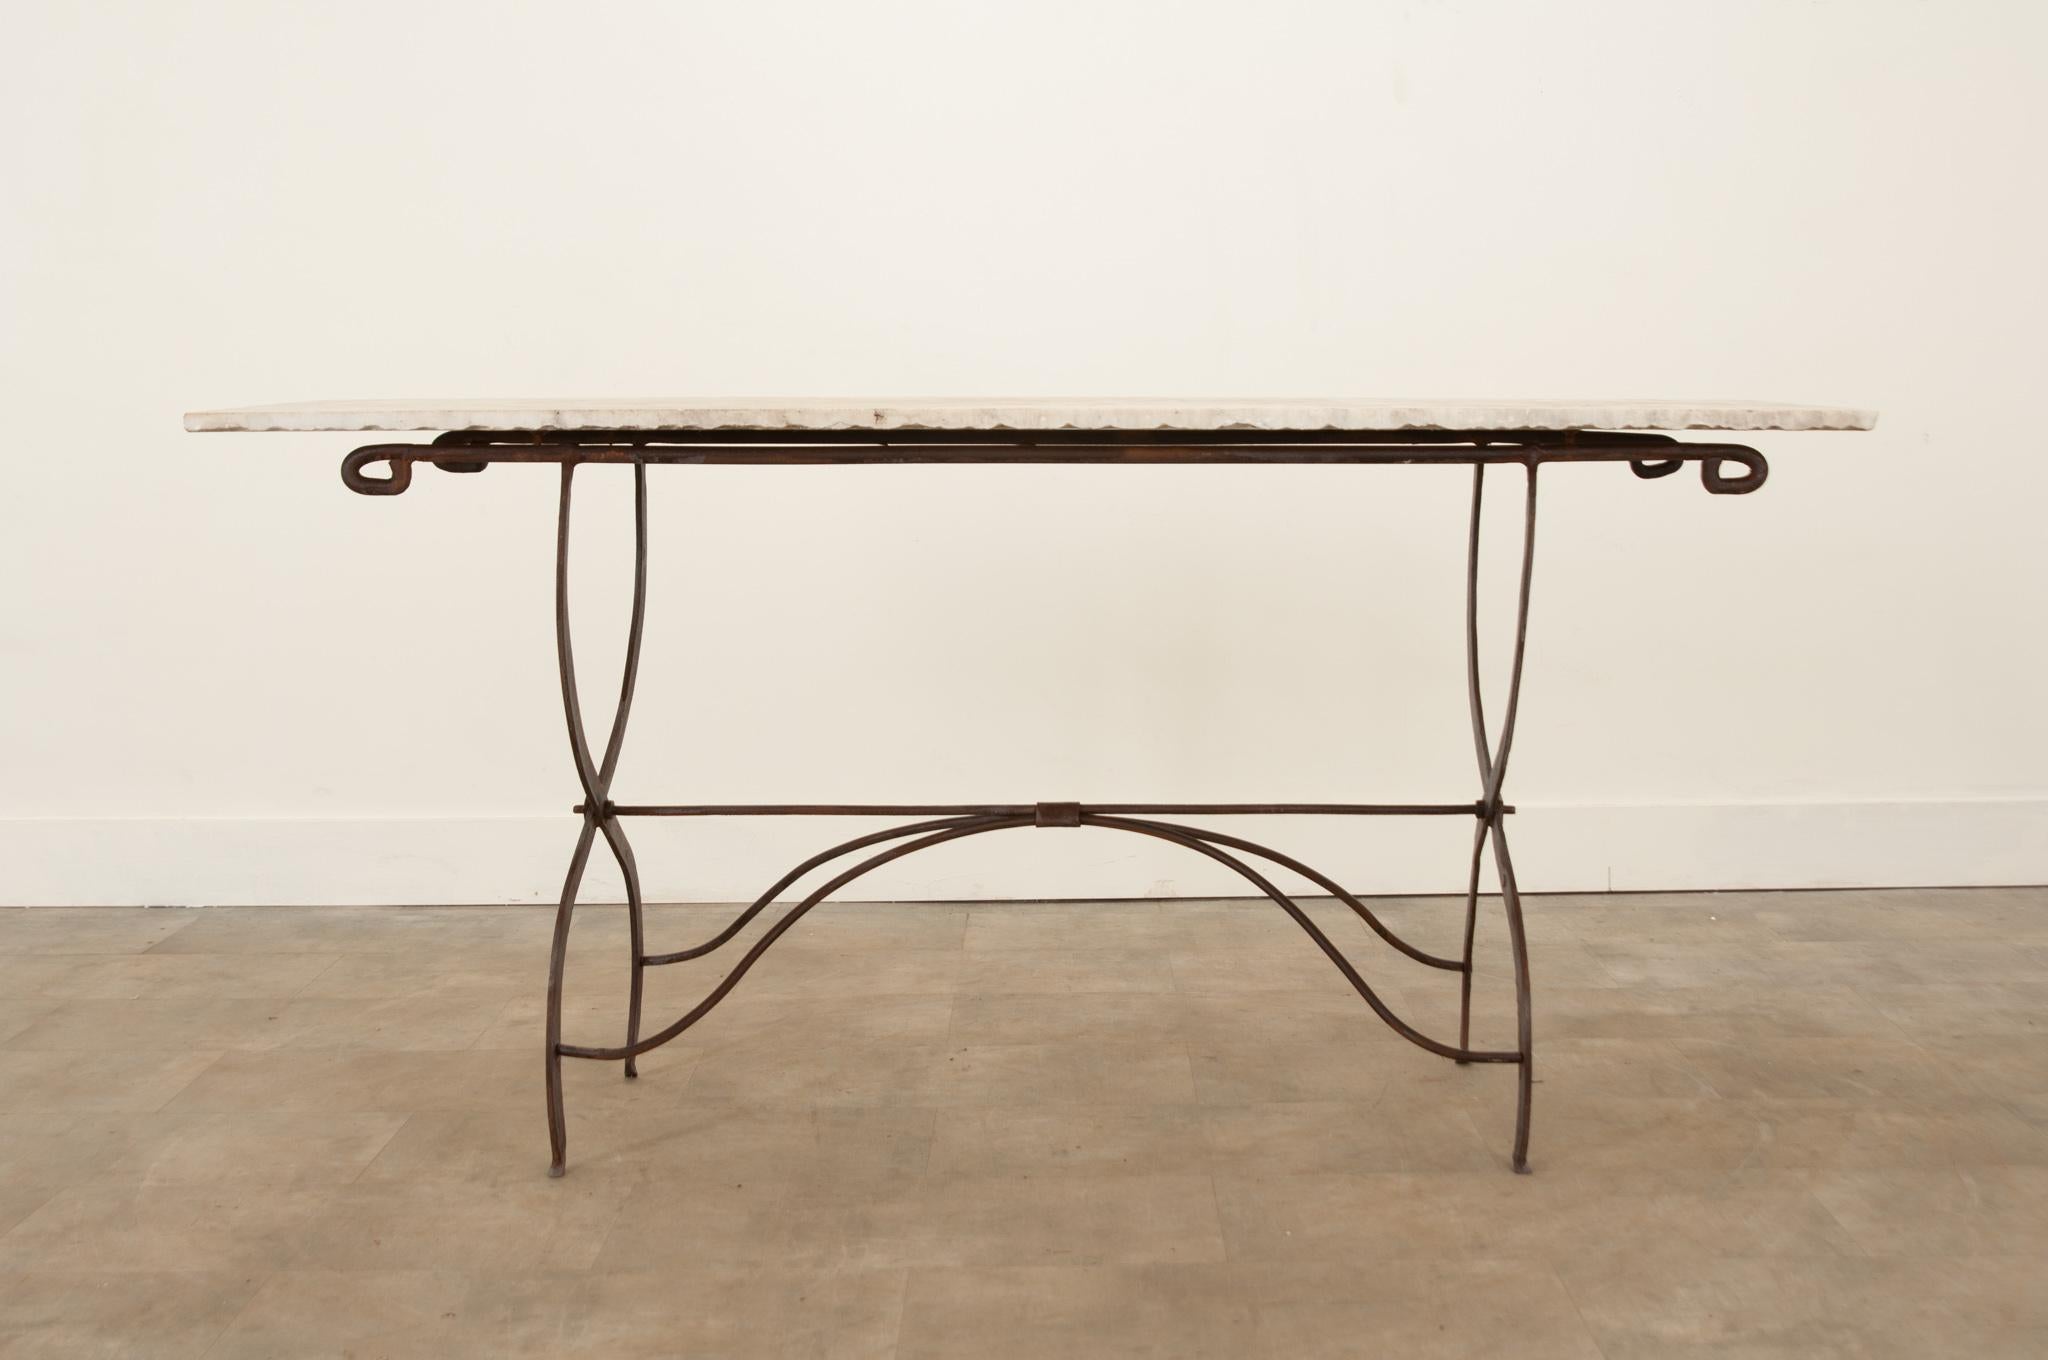 A fantastic bistro table from France, circa 1920s. Its uniquely shaped forged iron base has gained a wonderful patina and is topped with a long piece of white marble with characteristic raw edges. The width between the legs is 39-?”. Make sure to